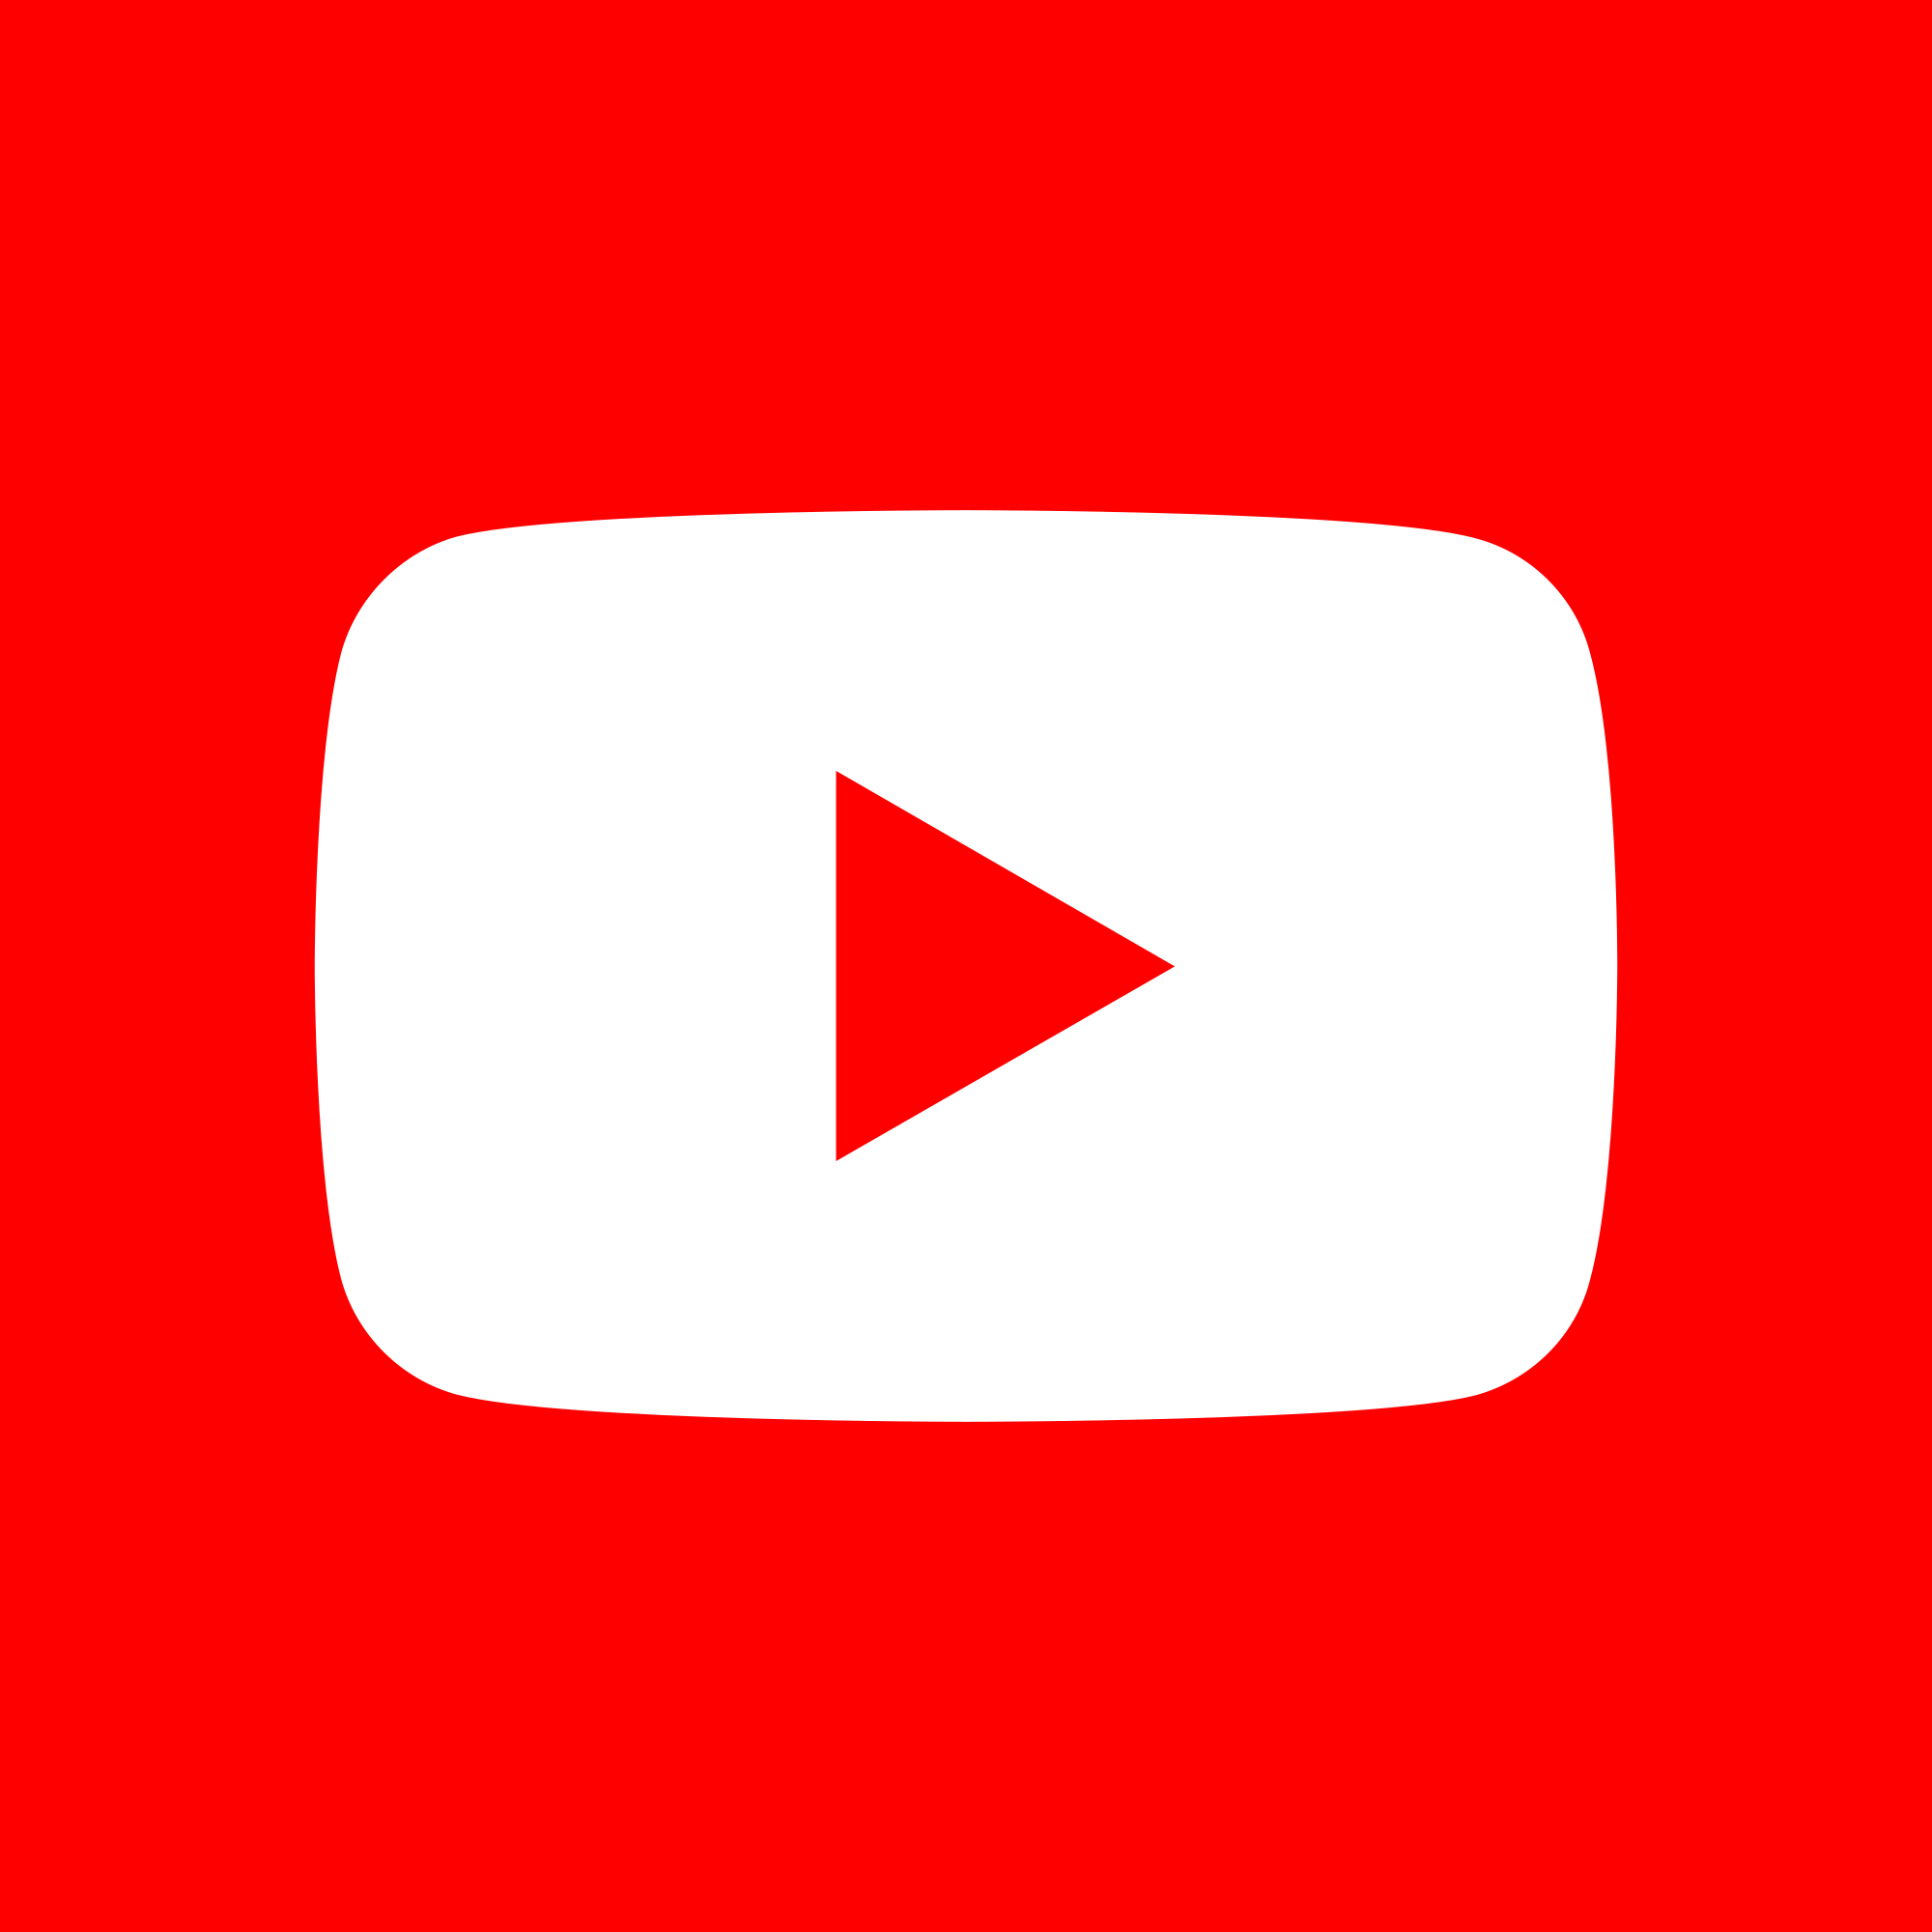 Red Square as Logo - File:YouTube social red square (2017).svg - Wikimedia Commons